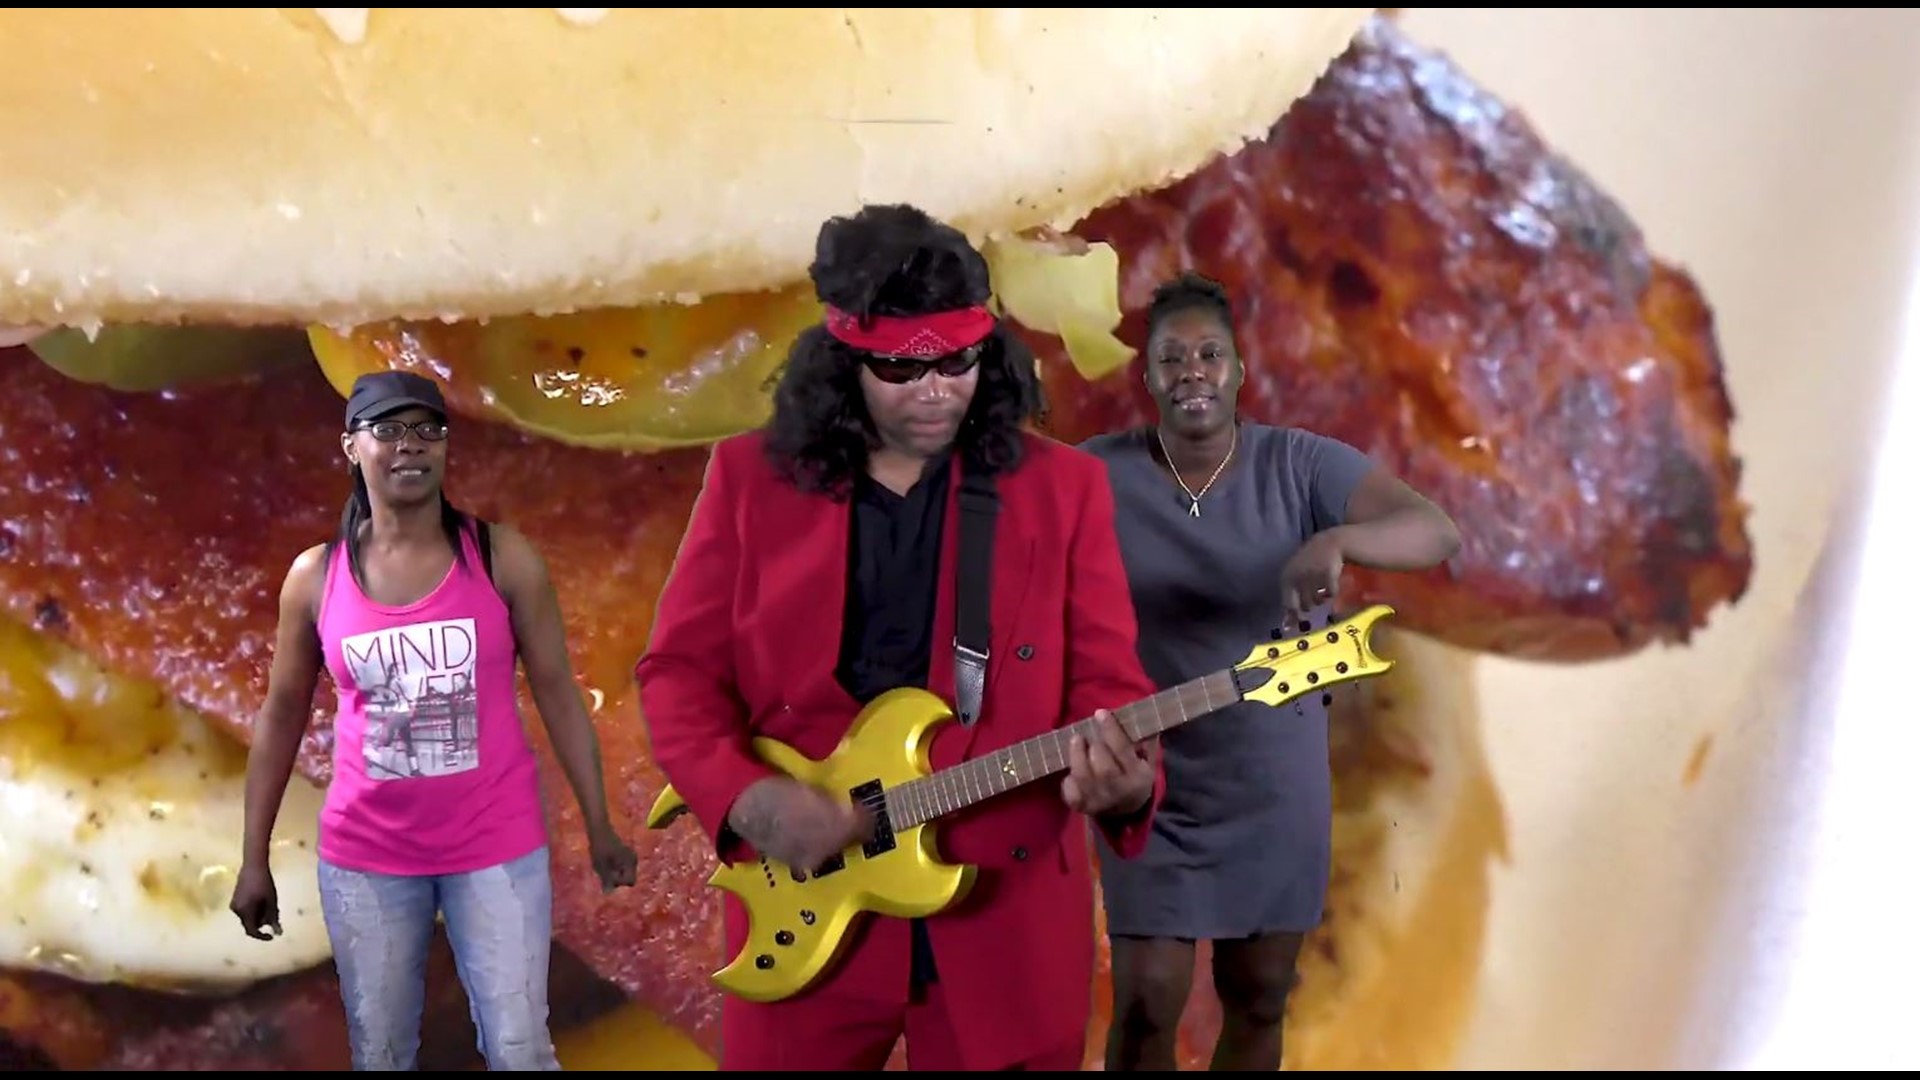 The Hamhock Jones ad for his Texas Queen burger is not to be missed!